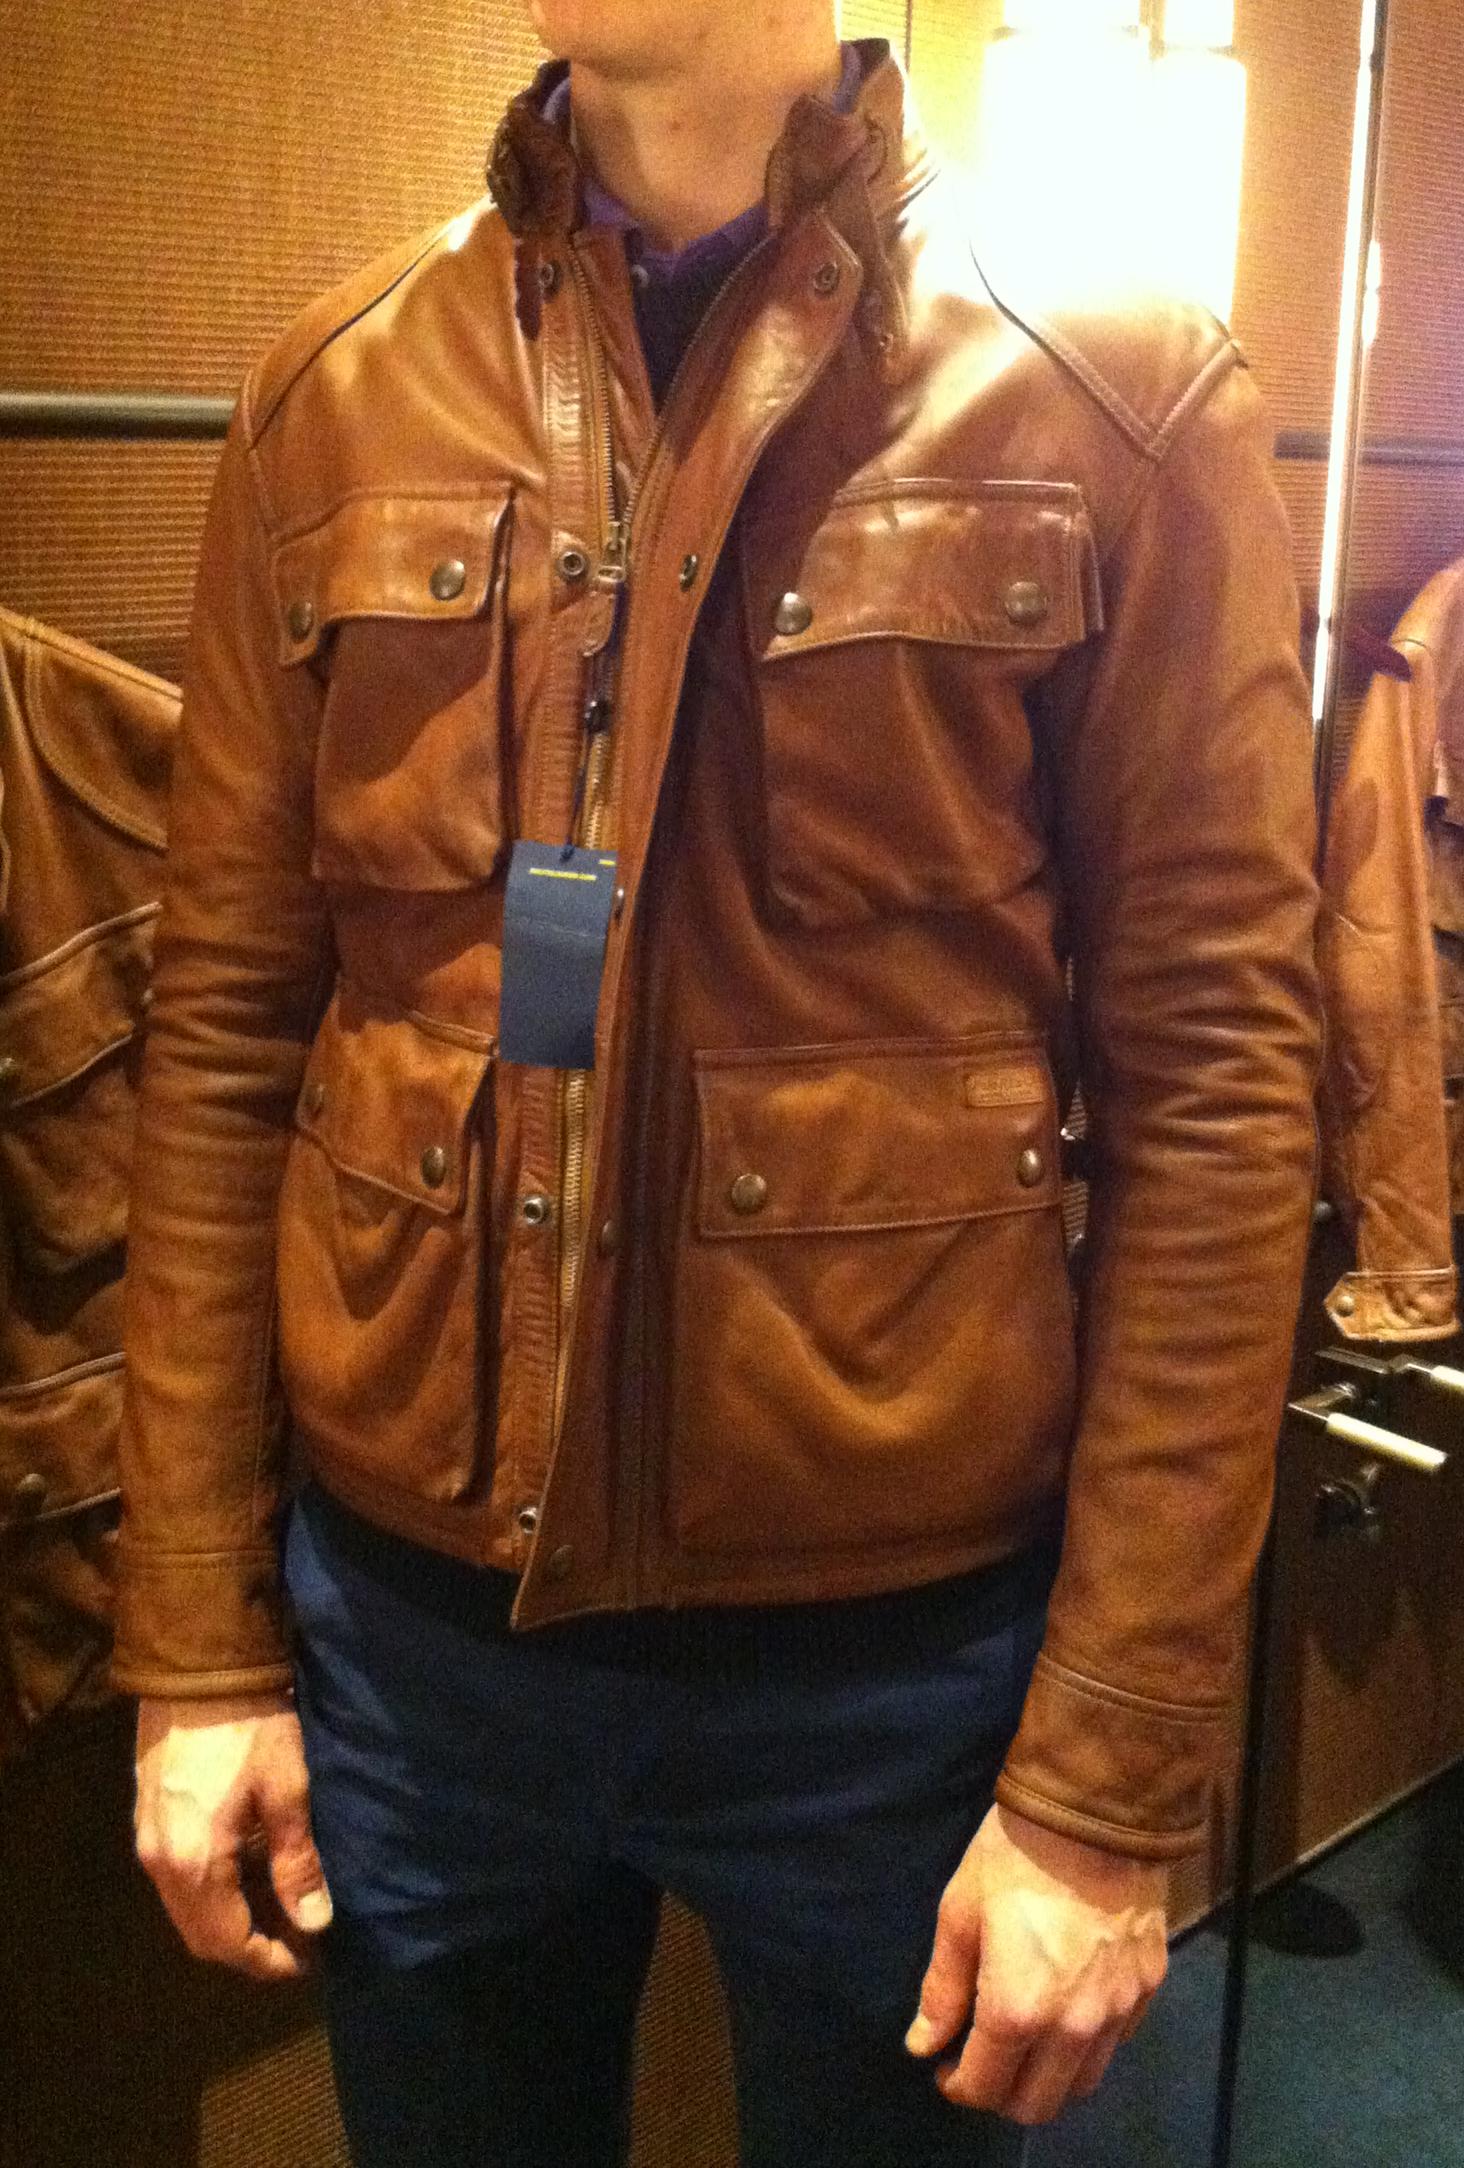 Looking for similar brown leather jackets like this PRLs | Styleforum